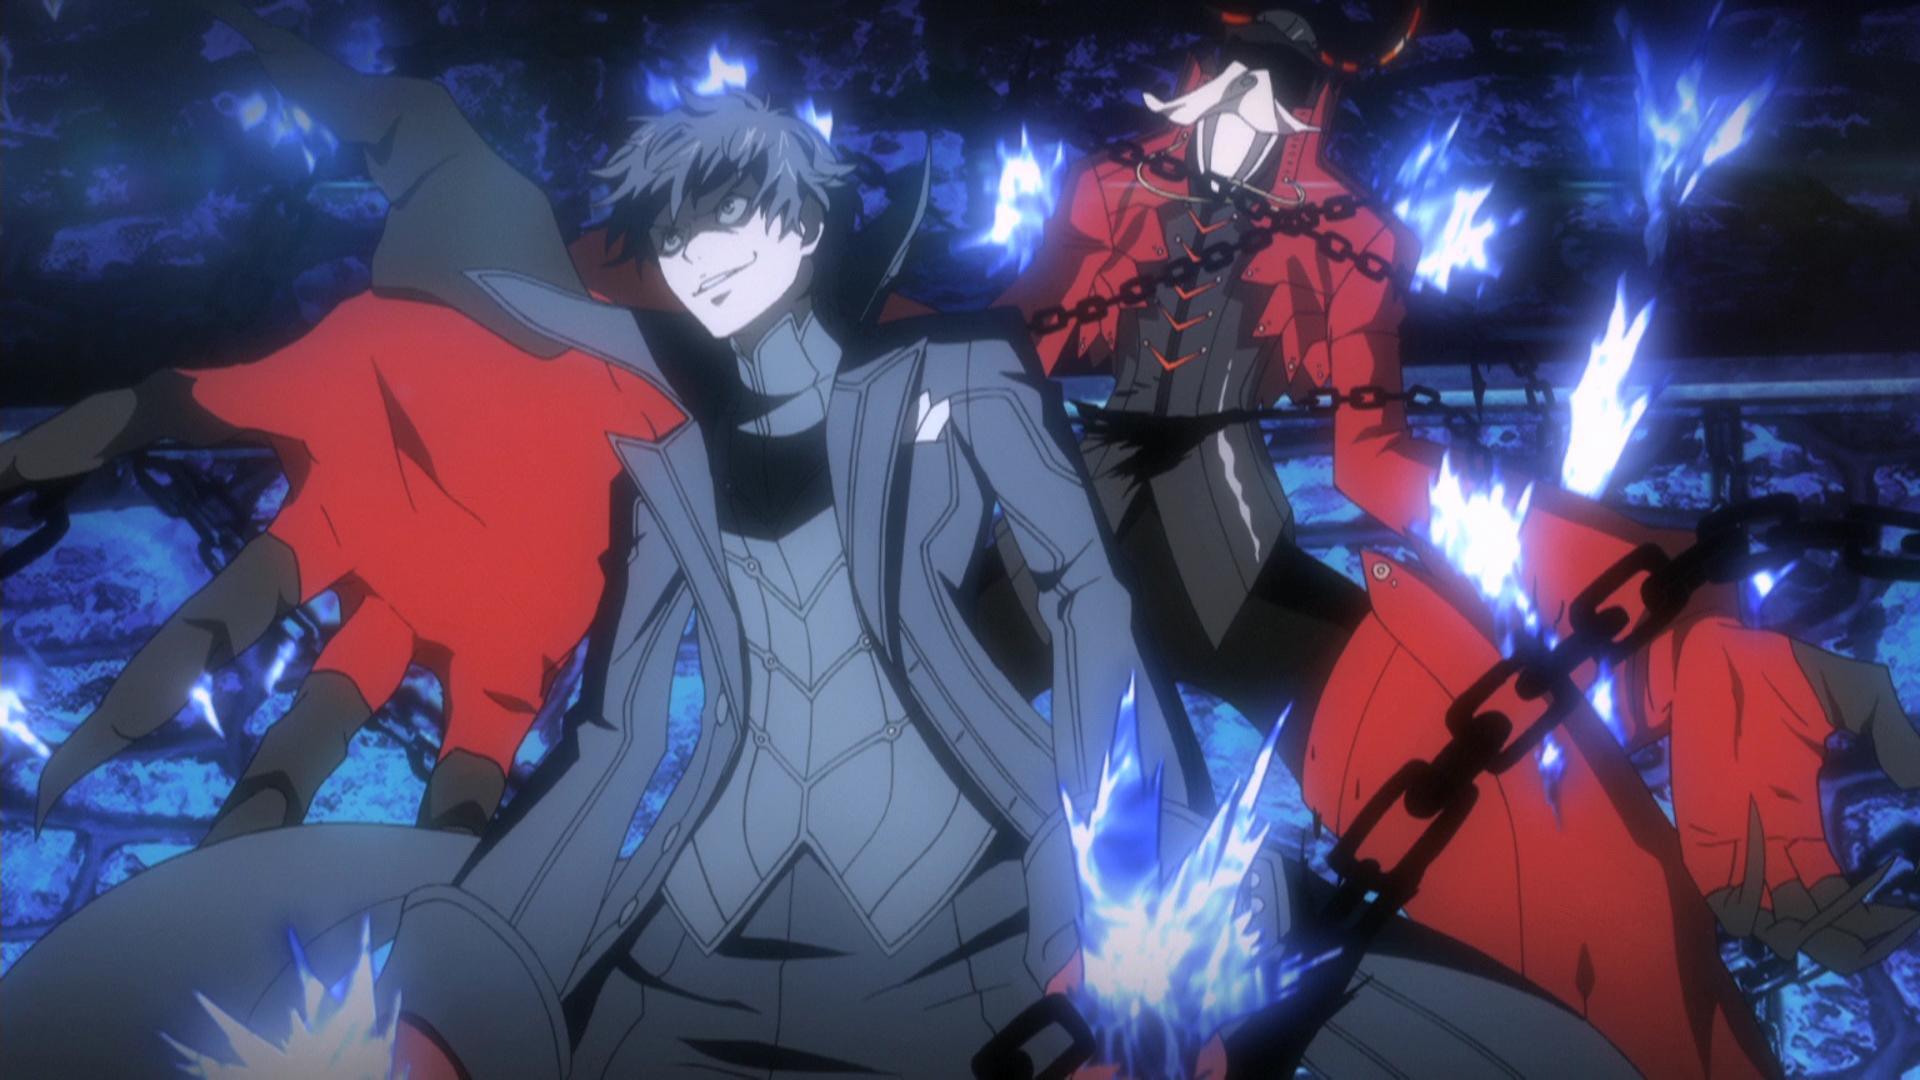 Persona 5 Gets New Images Leaked from Upcoming Trailer